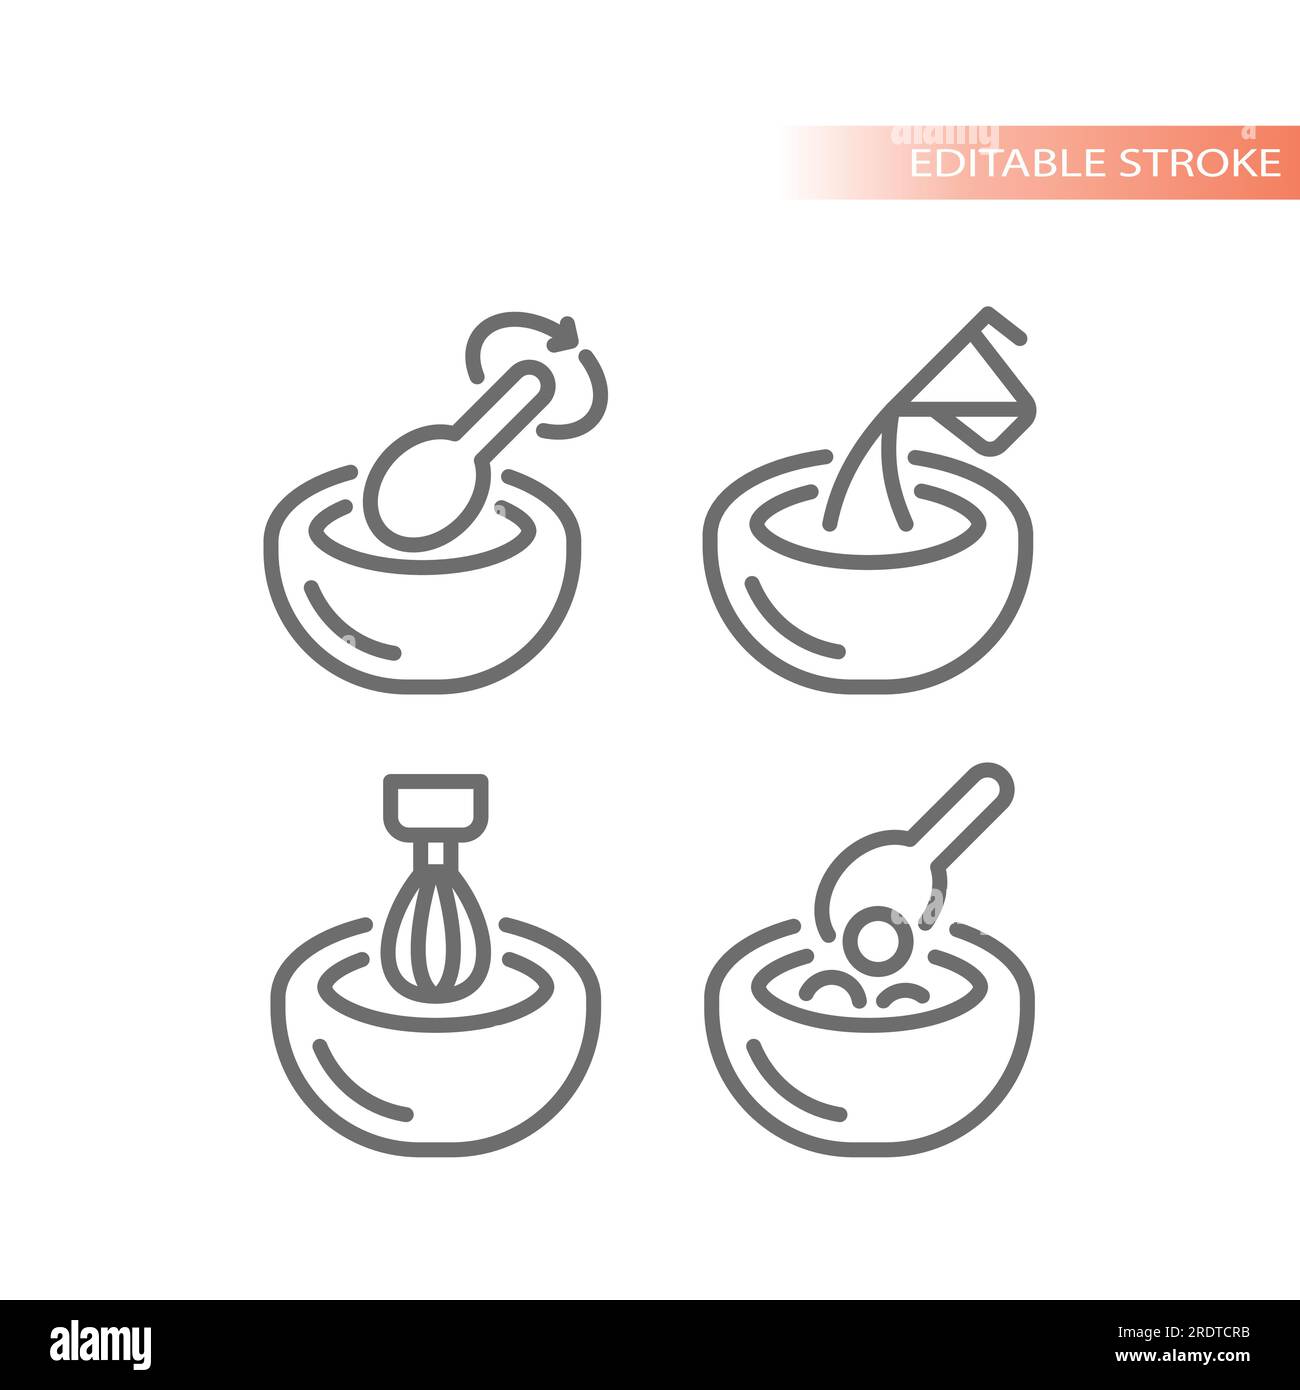 https://c8.alamy.com/comp/2RDTCRB/mixing-food-bowl-stir-with-whisk-or-egg-beater-line-icons-mixer-adding-ingredients-cooking-vector-icon-set-2RDTCRB.jpg